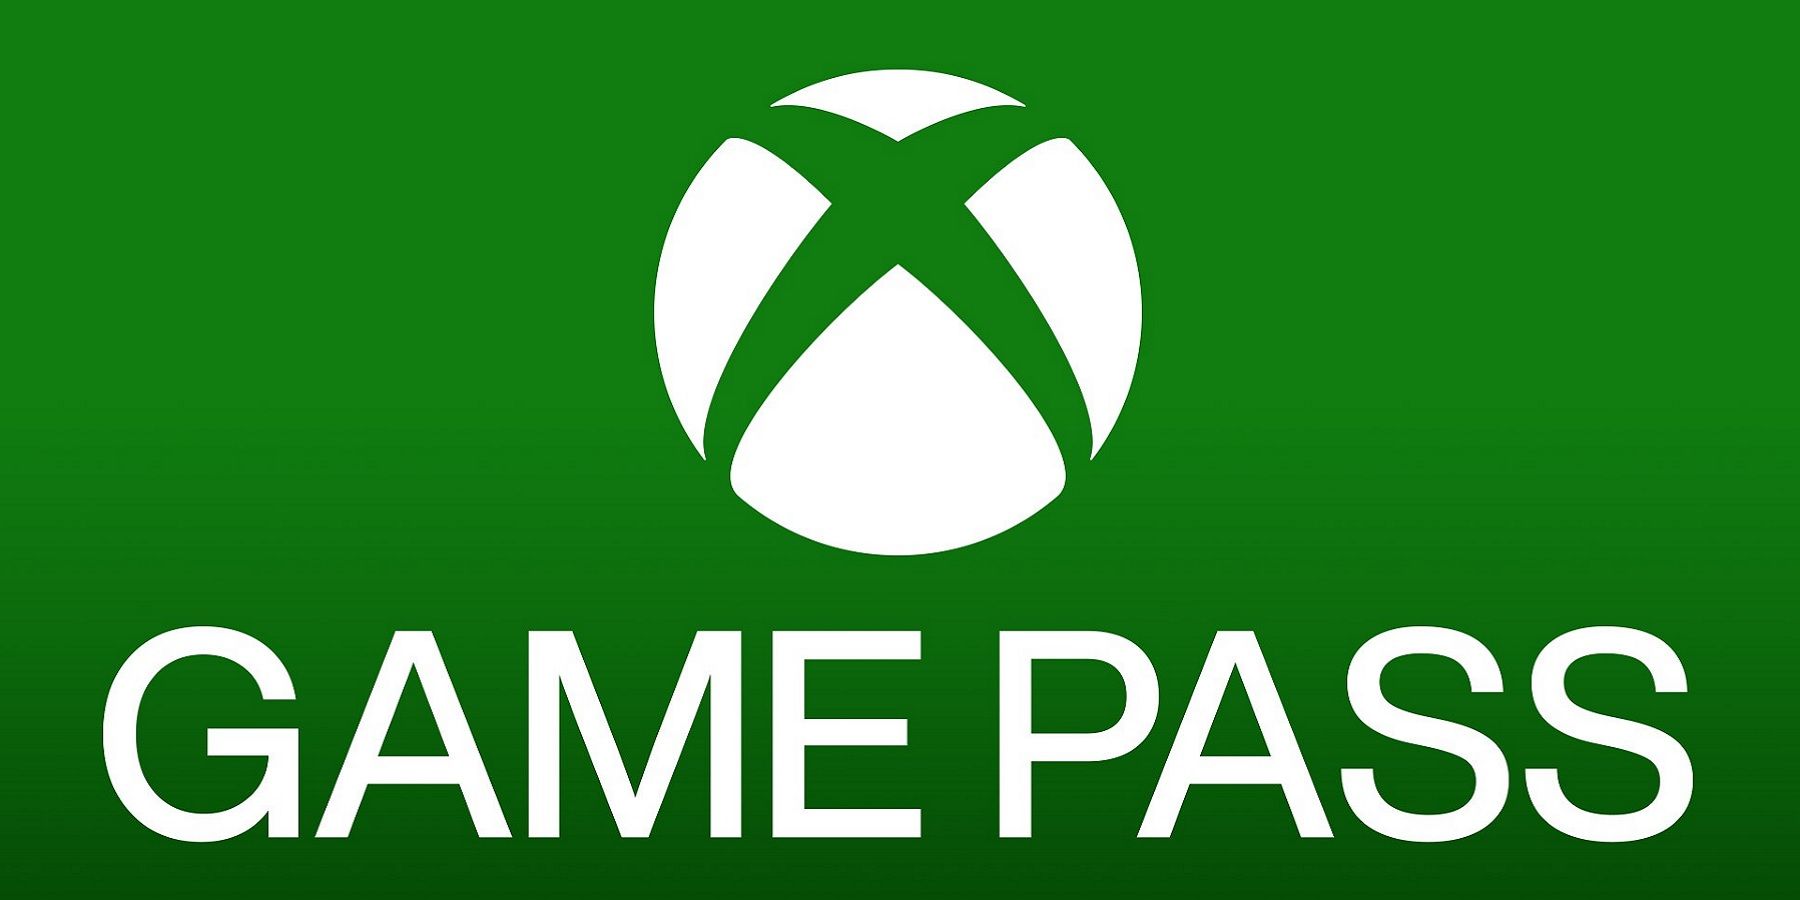 Xbox Game Pass Already Has 4 Day One Games Announced for August 2022